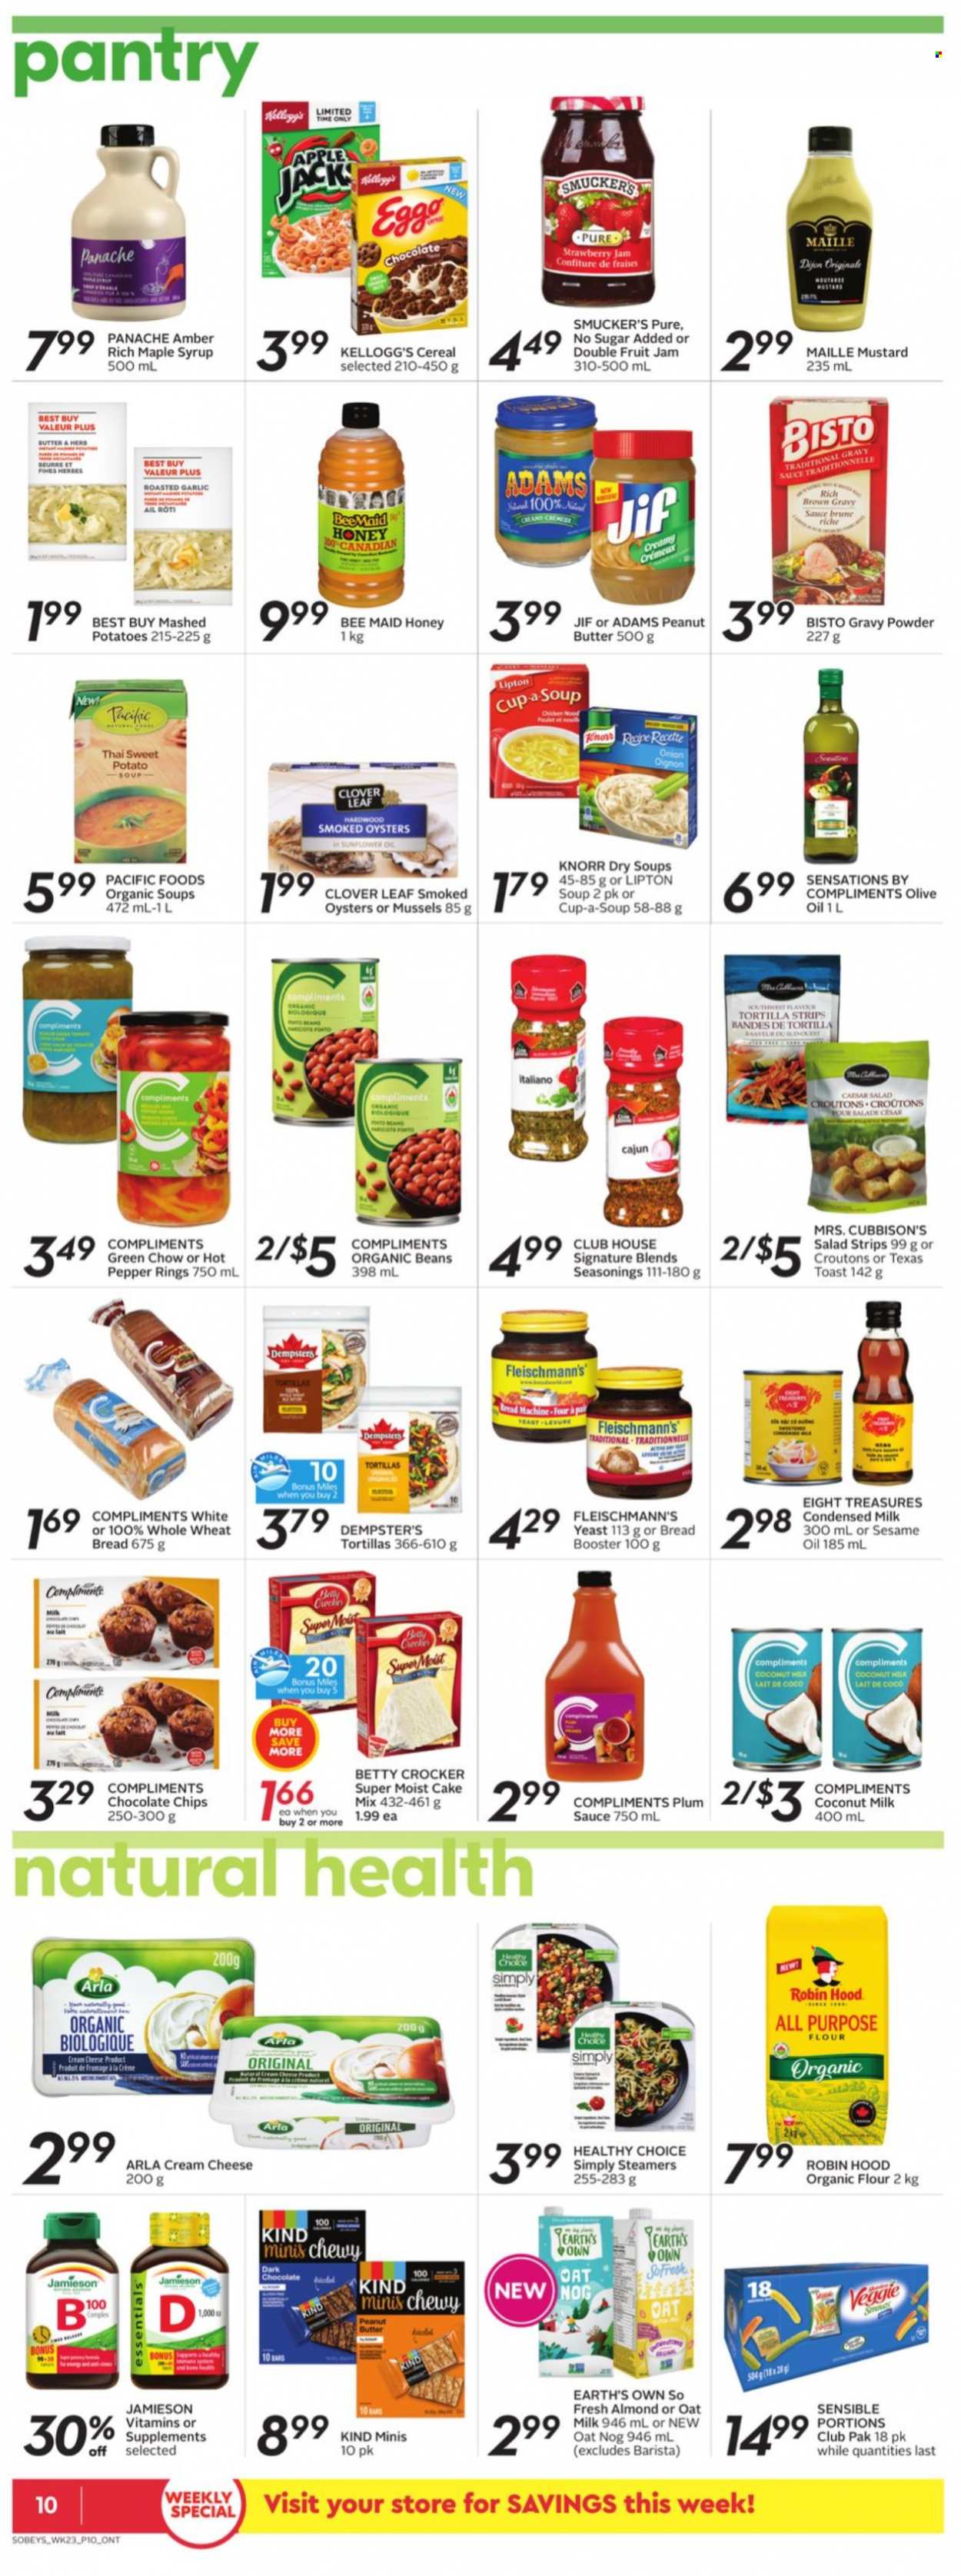 thumbnail - Sobeys Flyer - September 30, 2021 - October 06, 2021 - Sales products - tortillas, wheat bread, cake mix, beans, sweet potato, mussels, smoked oysters, oysters, mashed potatoes, soup, sauce, Healthy Choice, cream cheese, cheese, Arla, Clover, condensed milk, oat milk, yeast, Kellogg's, dark chocolate, all purpose flour, croutons, coconut milk, strawberry jam, cereals, mustard, sesame oil, olive oil, maple syrup, honey, fruit jam, peanut butter, syrup, Jif, Knorr, Lipton. Page 10.